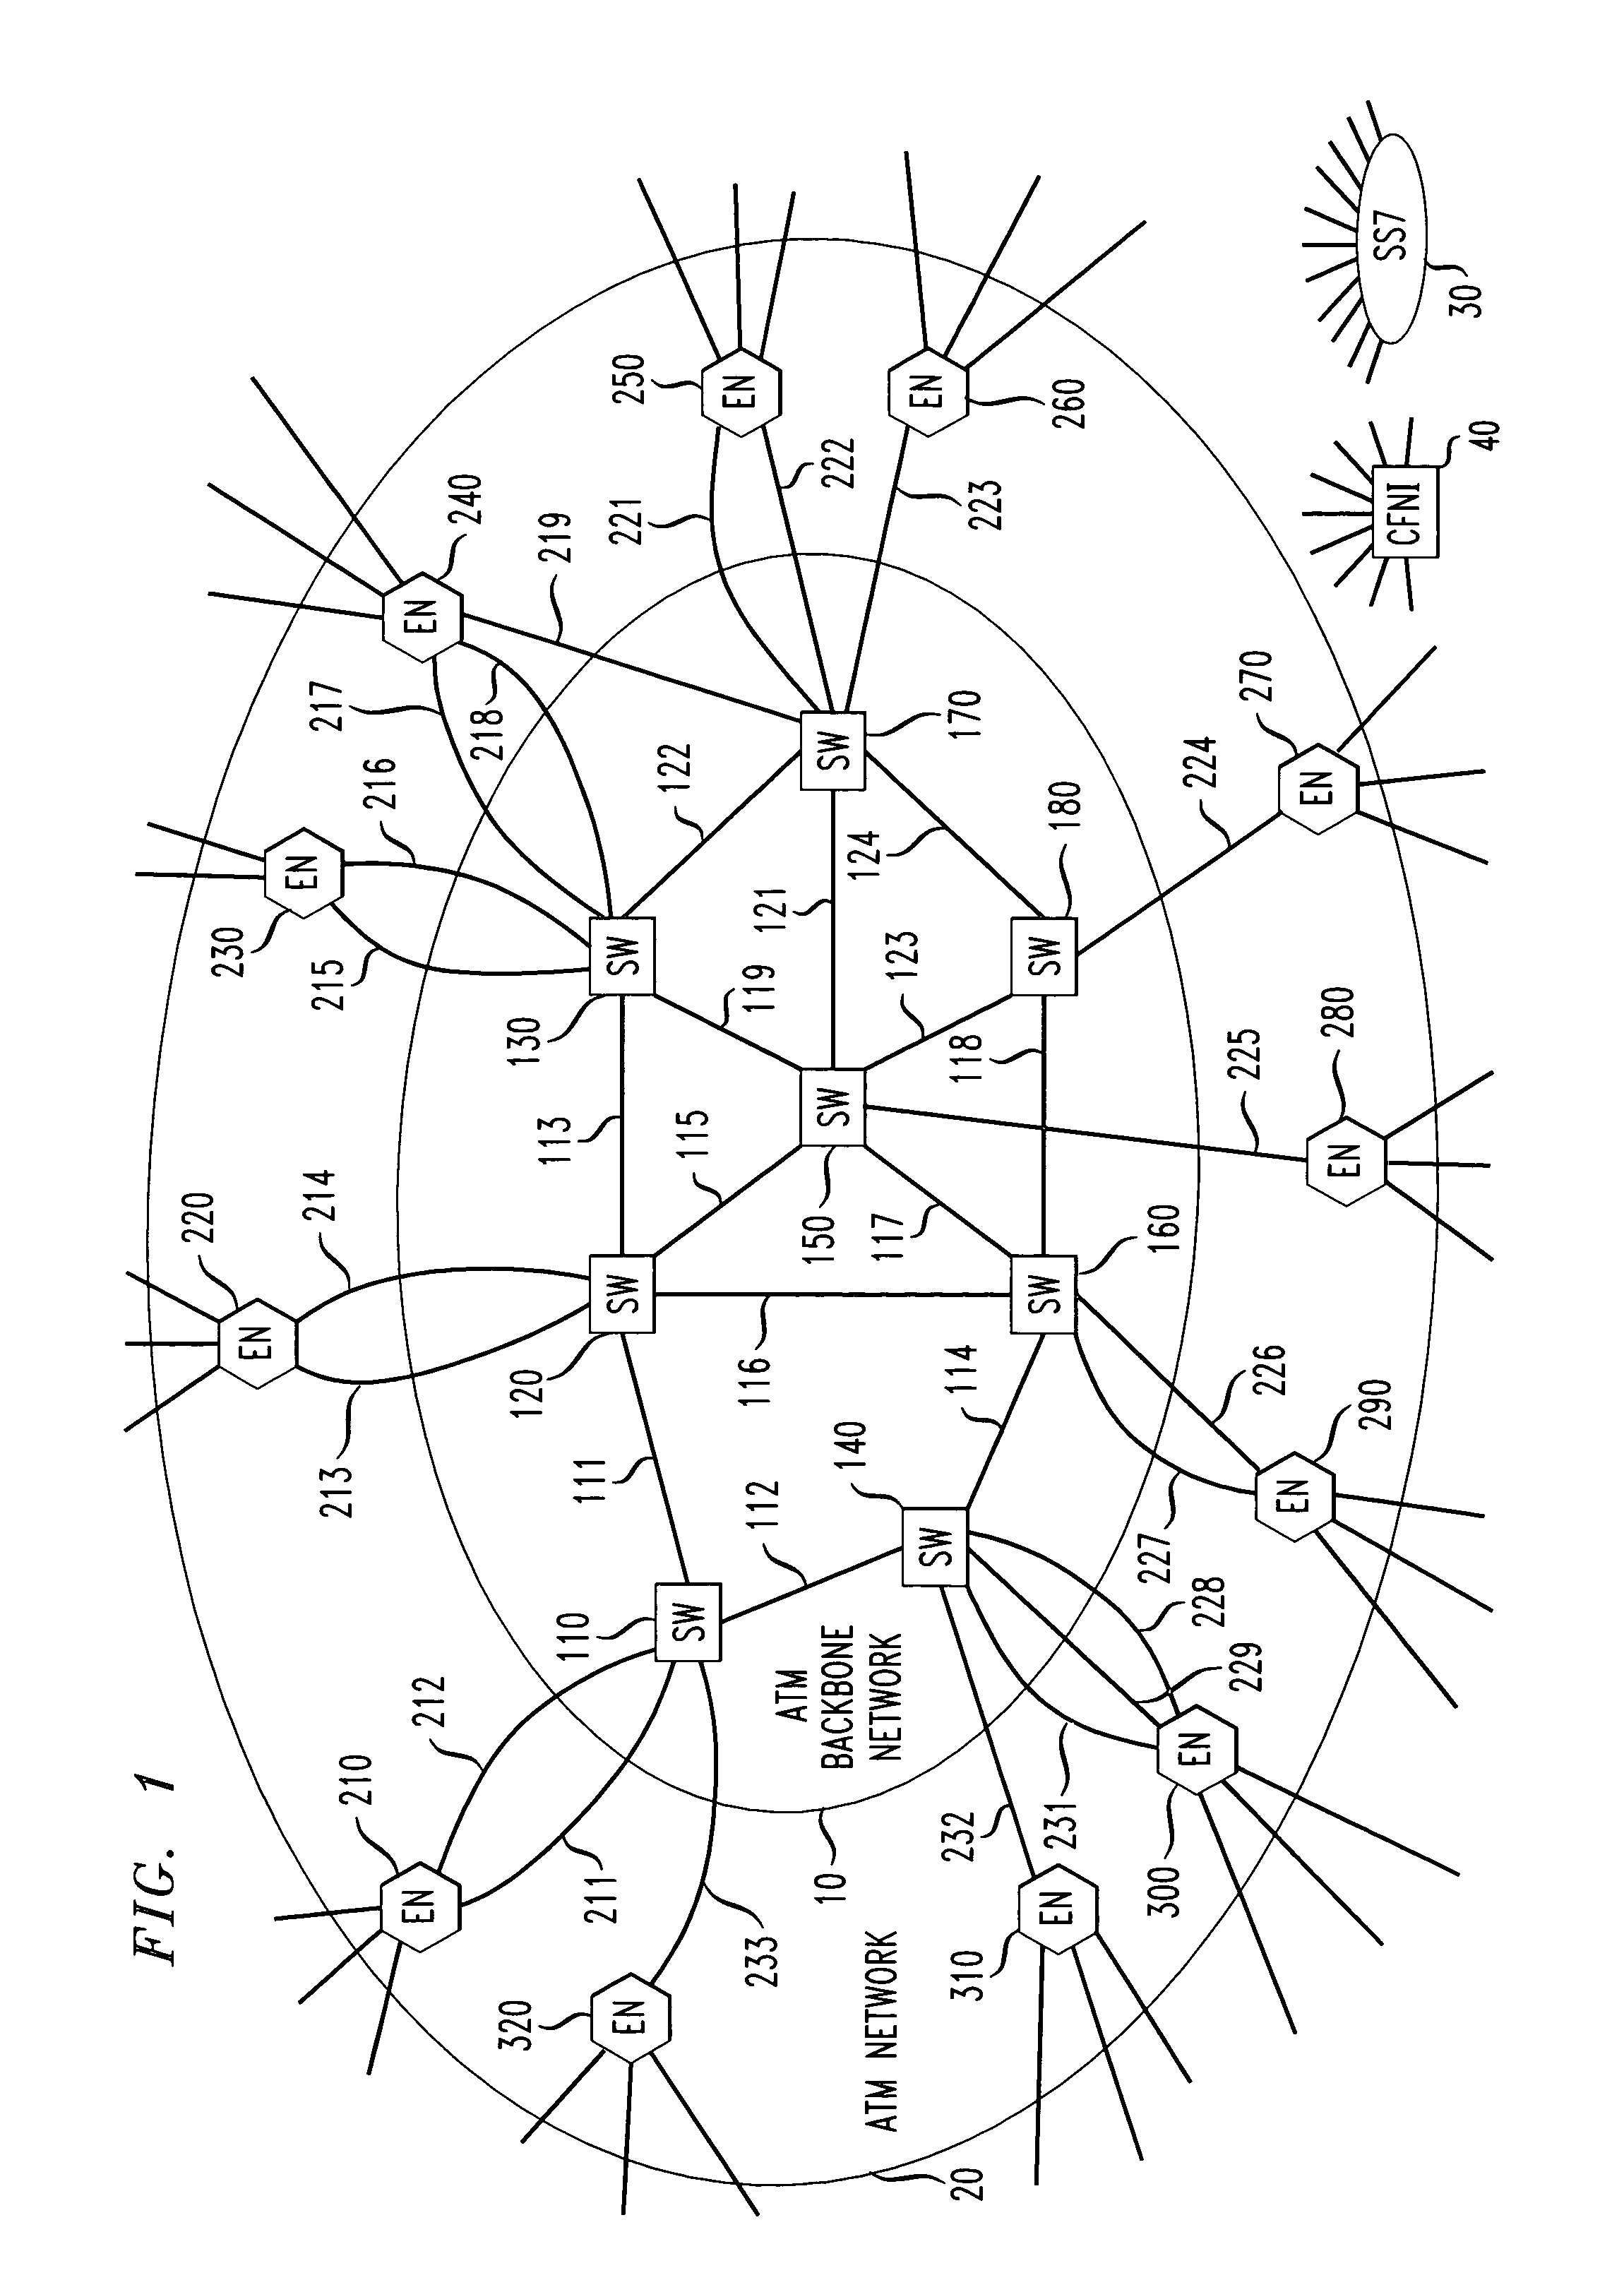 Integrated switching and facility networks